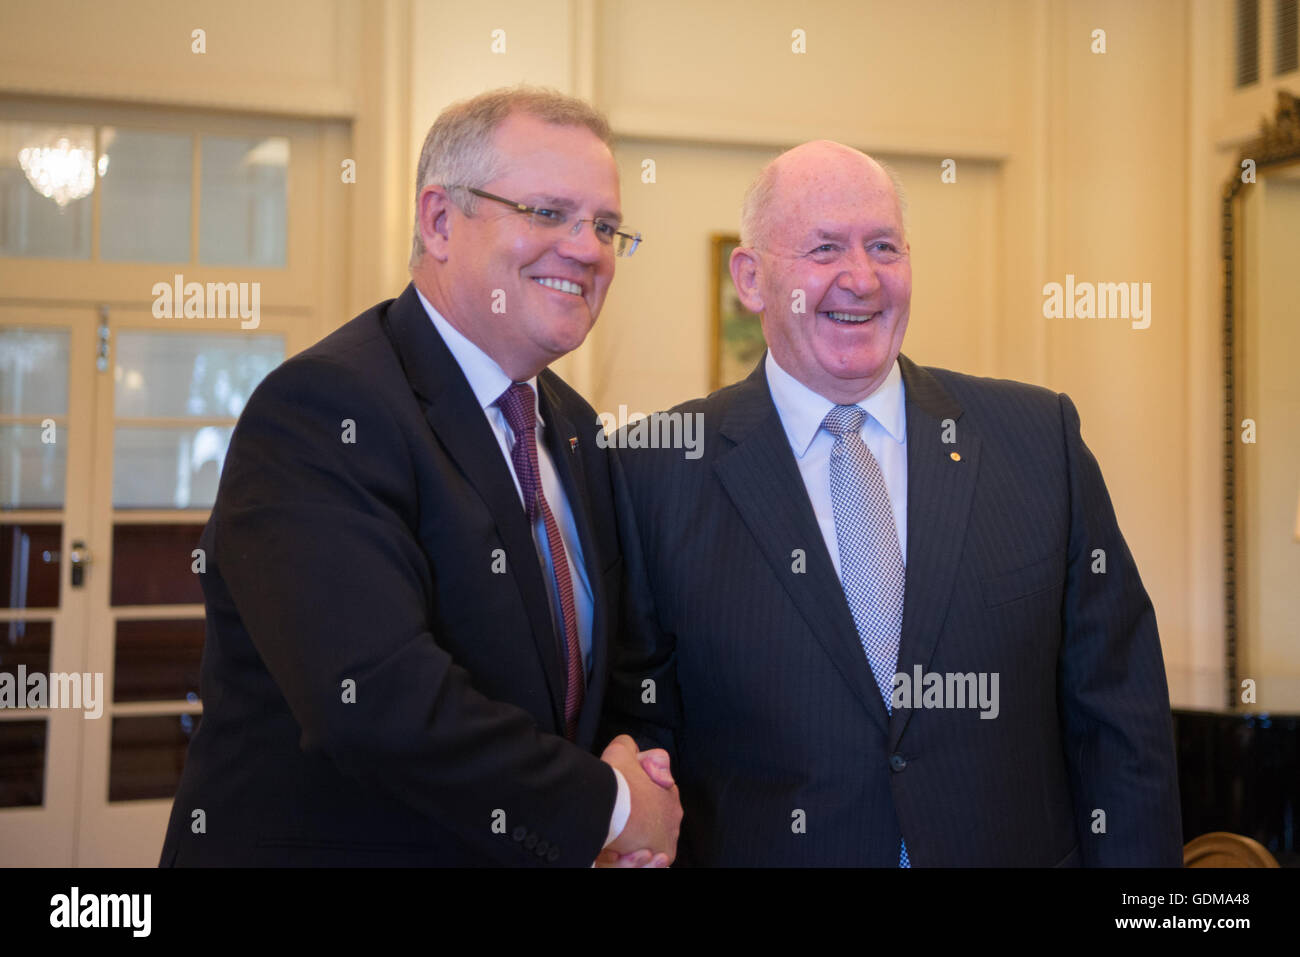 Canberra, Australia. 19th July, 2016. Scott Morrison (L) is sworn in as Australian Treasurer at a ceremony by Governor-General Peter Cosgrove at the Government House in Canberra, Australia, July 19, 2016. Credit:  Xu Haijing/Xinhua/Alamy Live News Stock Photo